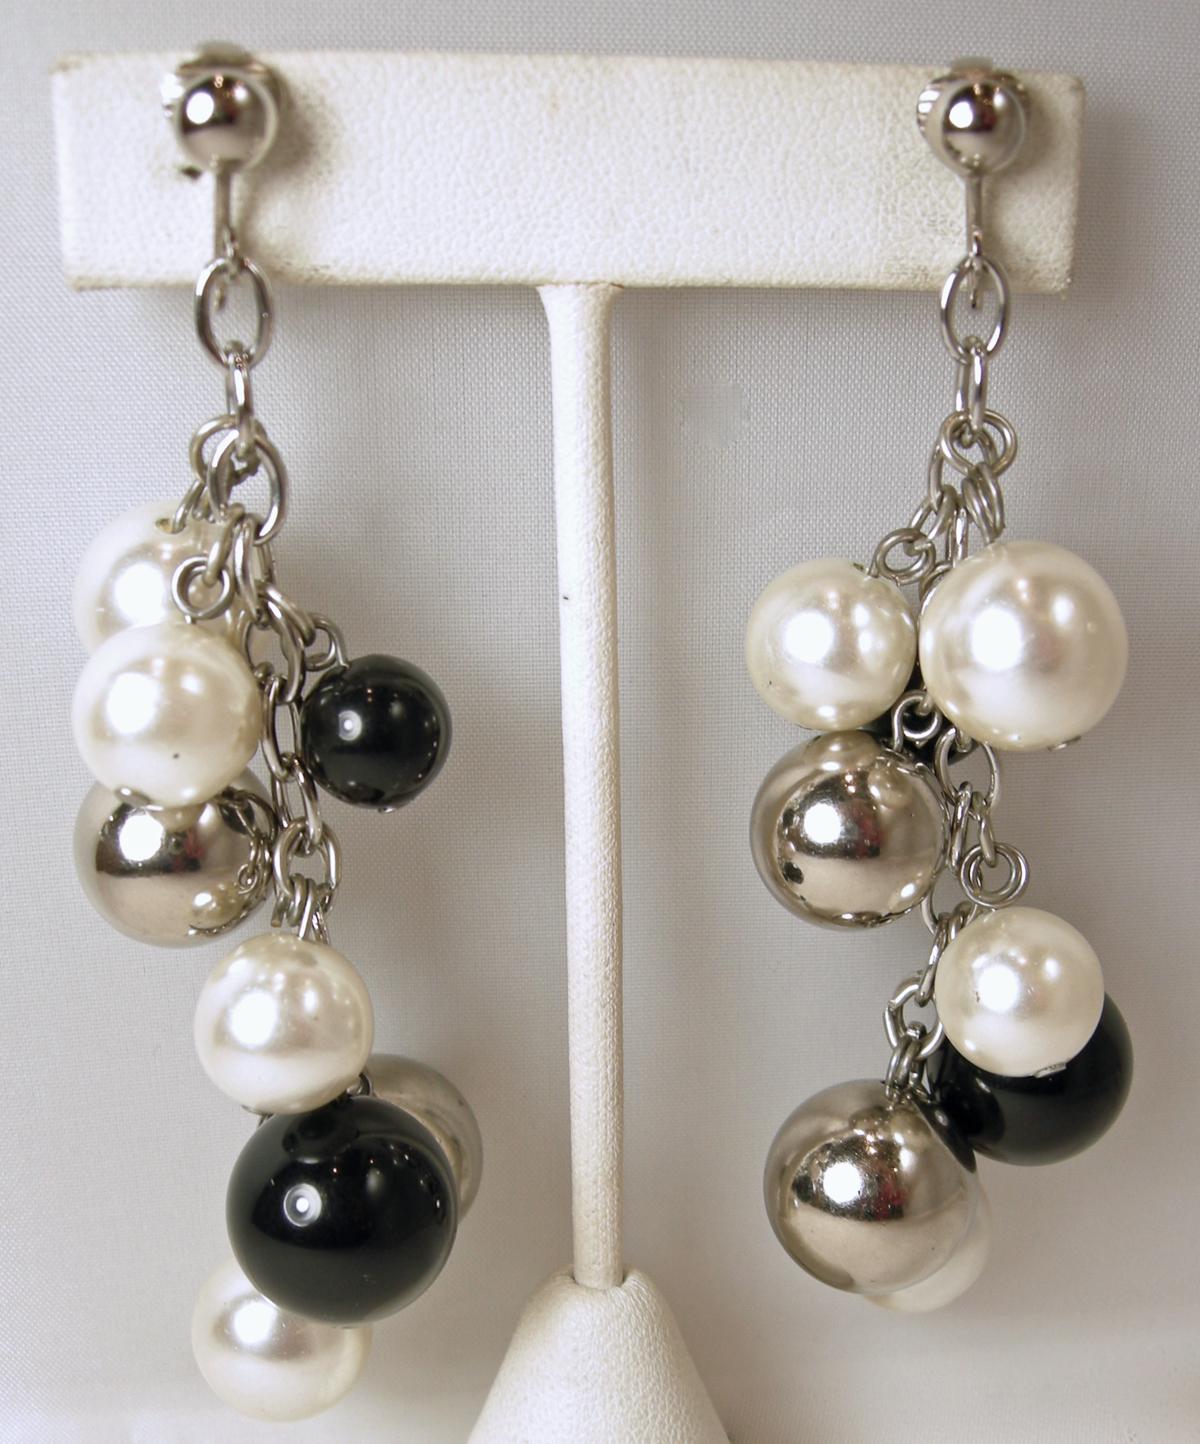 These vintage long earrings have faux pearls with black and silver tone beads streaming downward connected to a silver tone chain. In excellent condition, these clip earrings measure 3-1/2” x approx 1”.